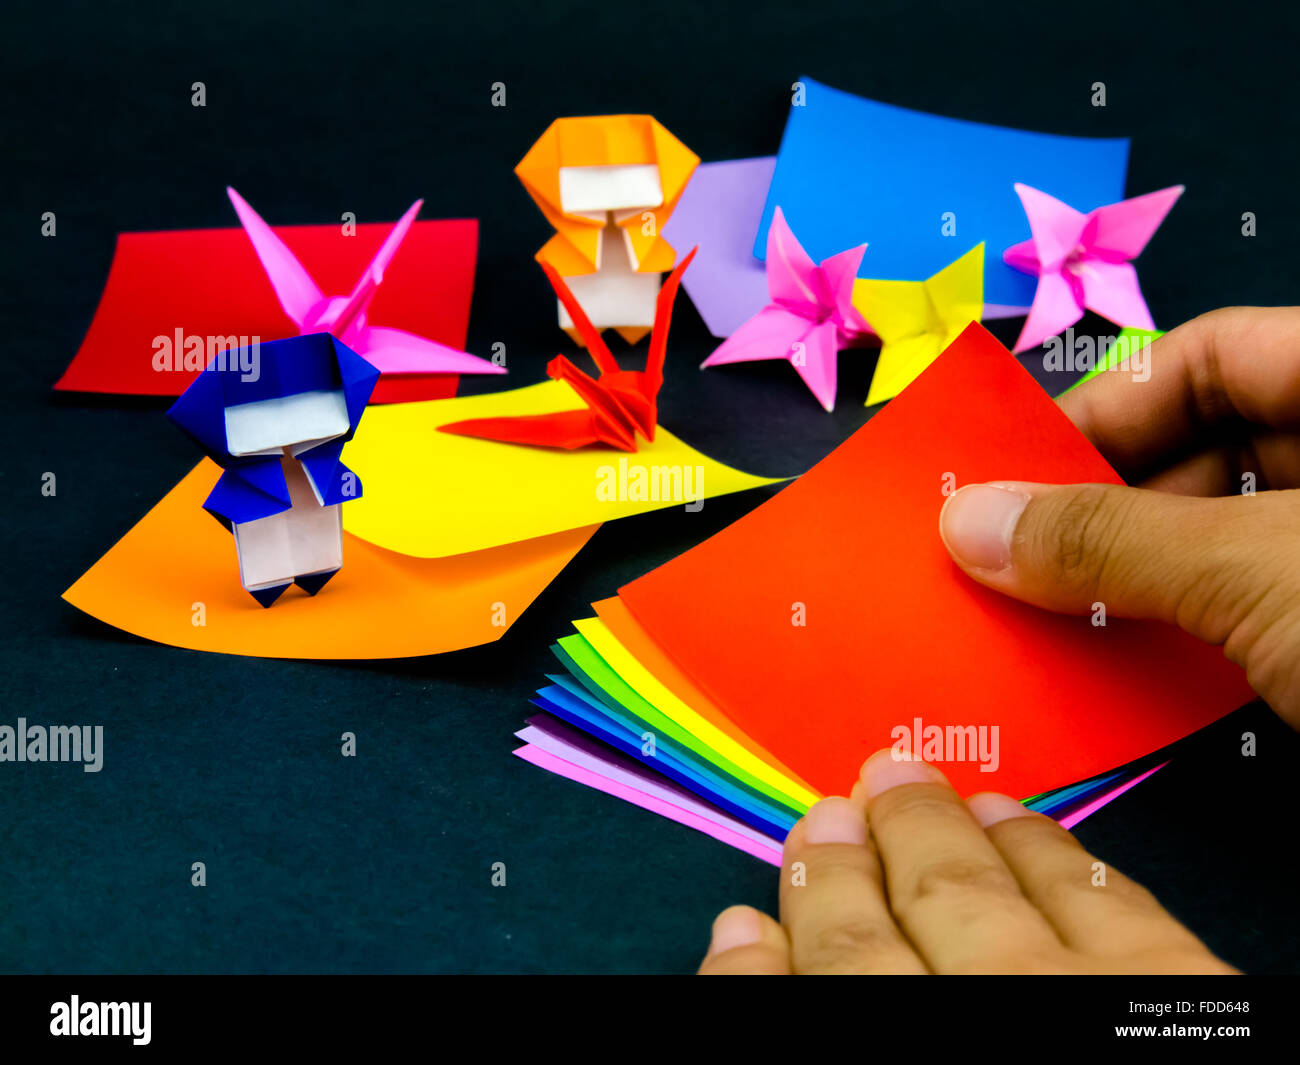 Japanese Origami Toys Folding Instructions; How to Play Stock Photo